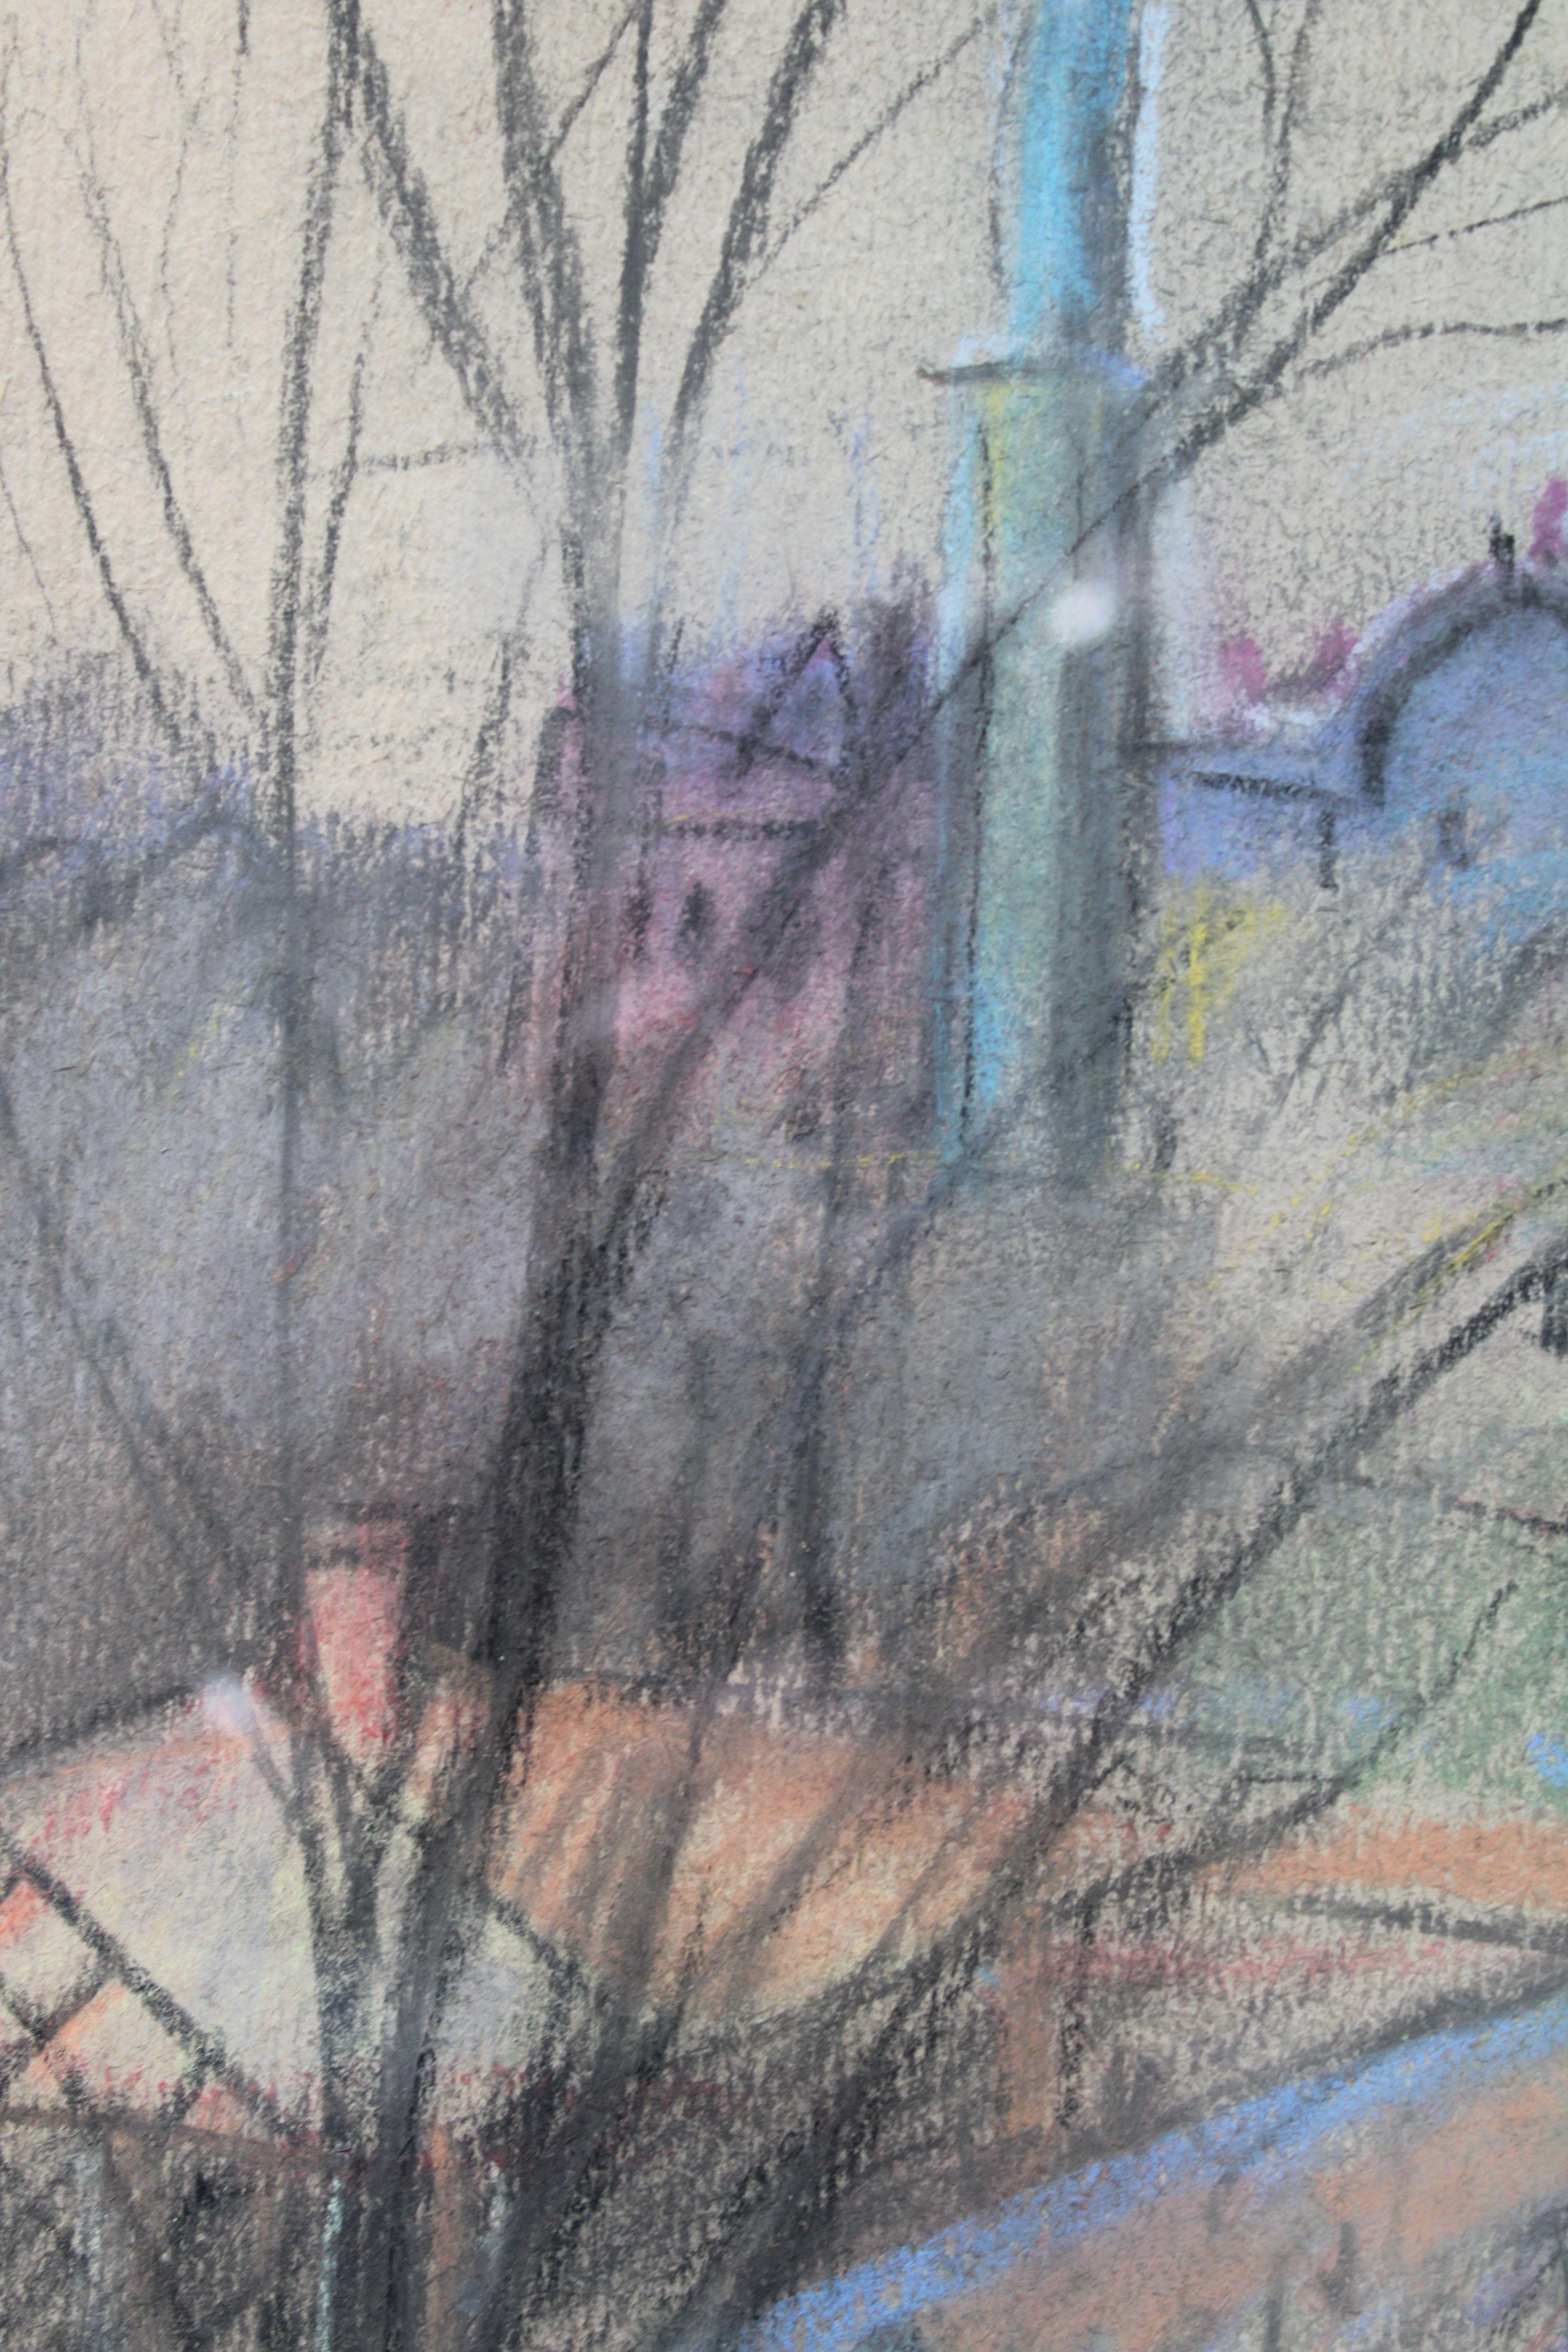 Outlook of the city

1960. paper, pastel. 29x40 cm

